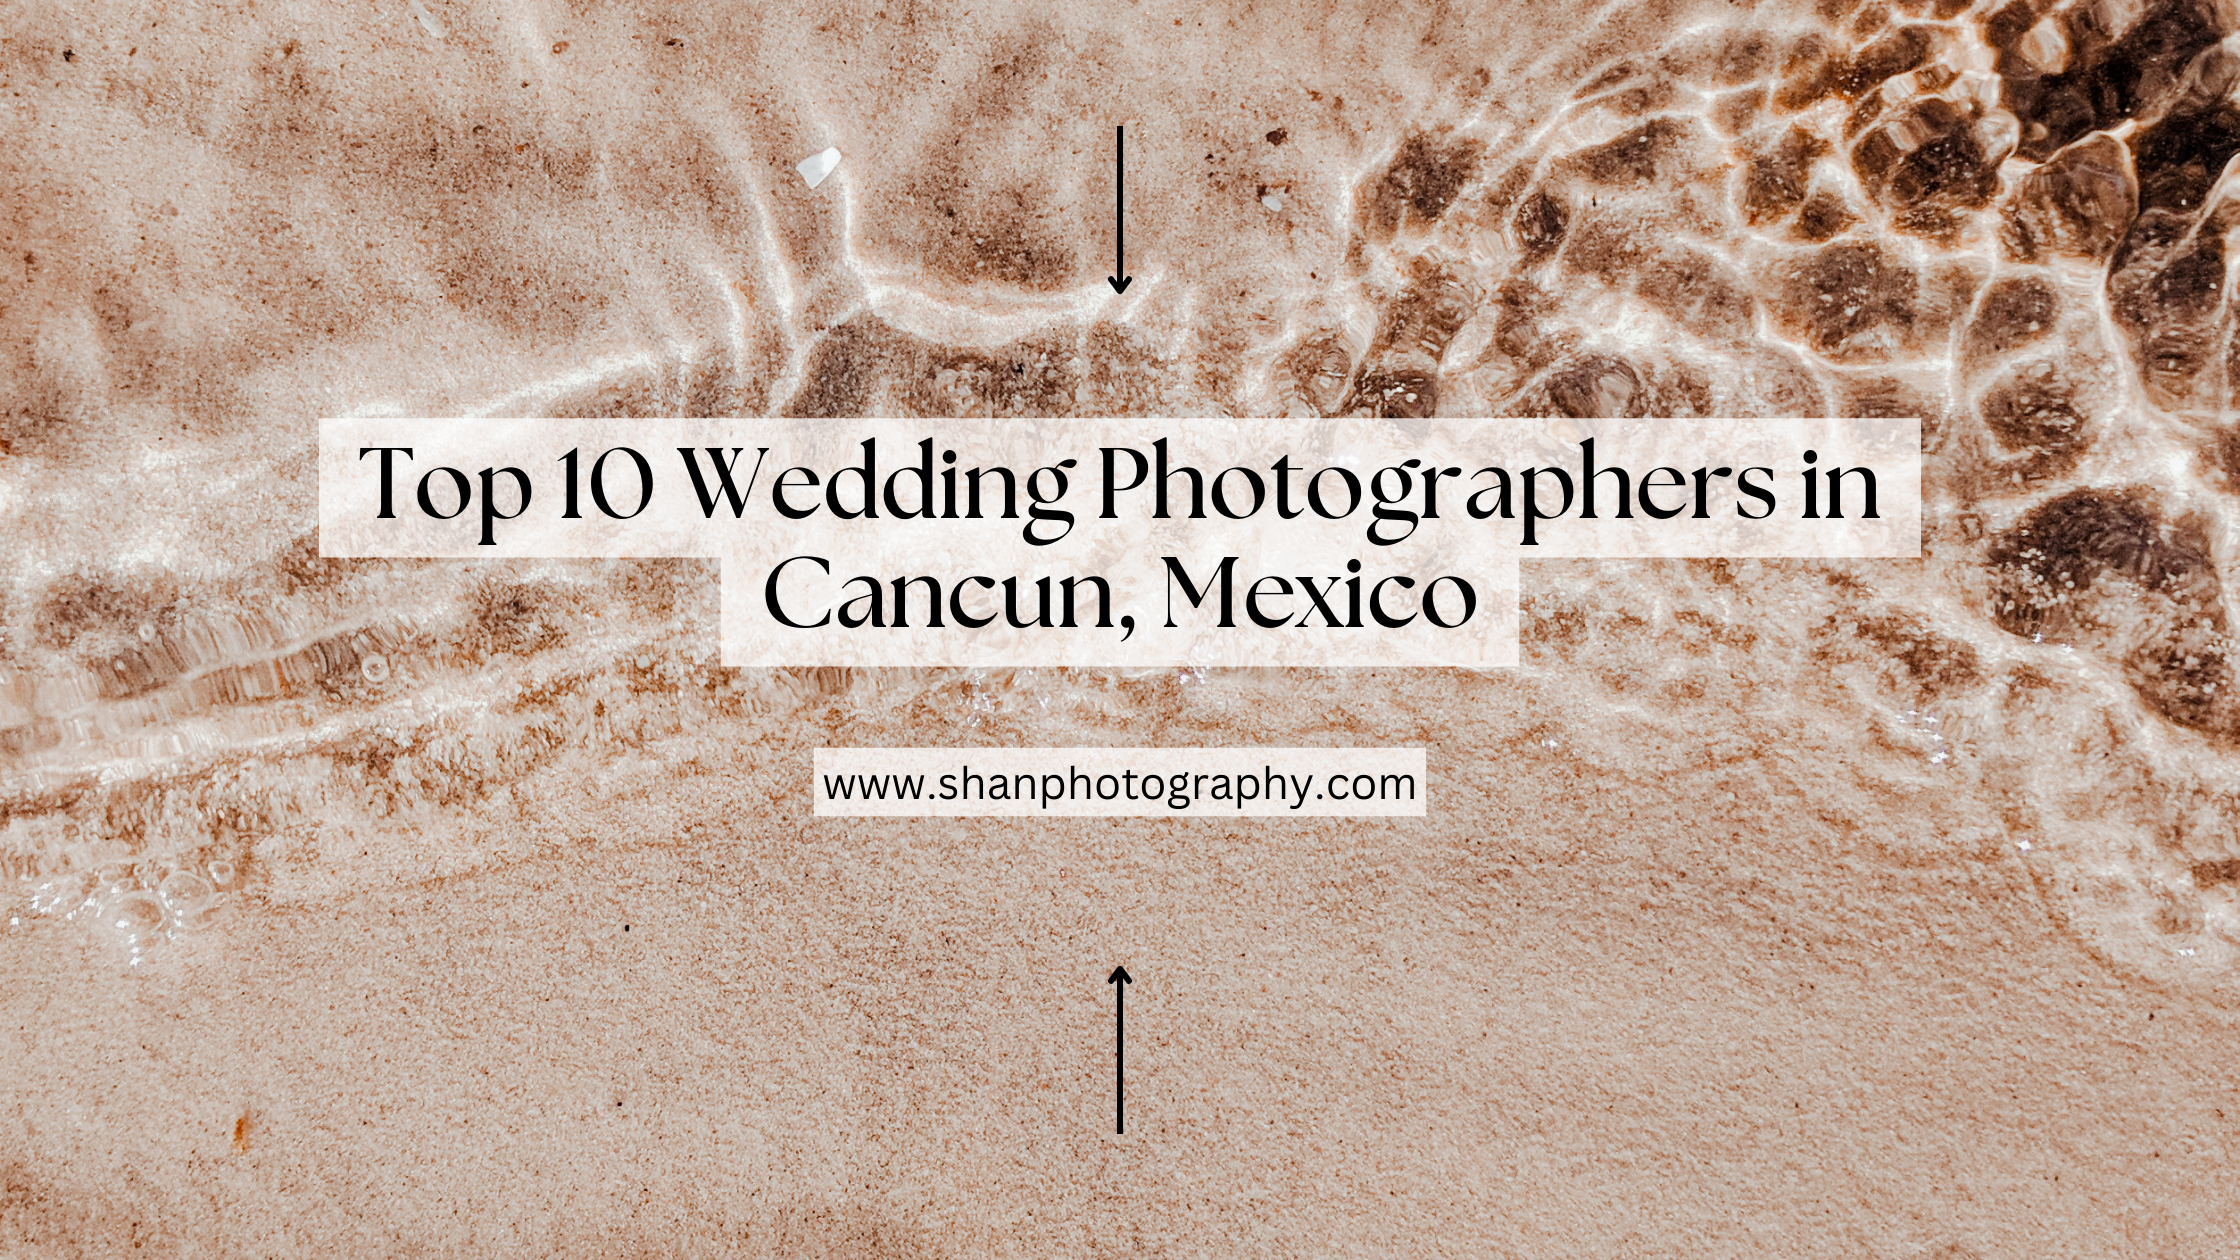 Top 10 Wedding Photographers in Cancun, Mexico